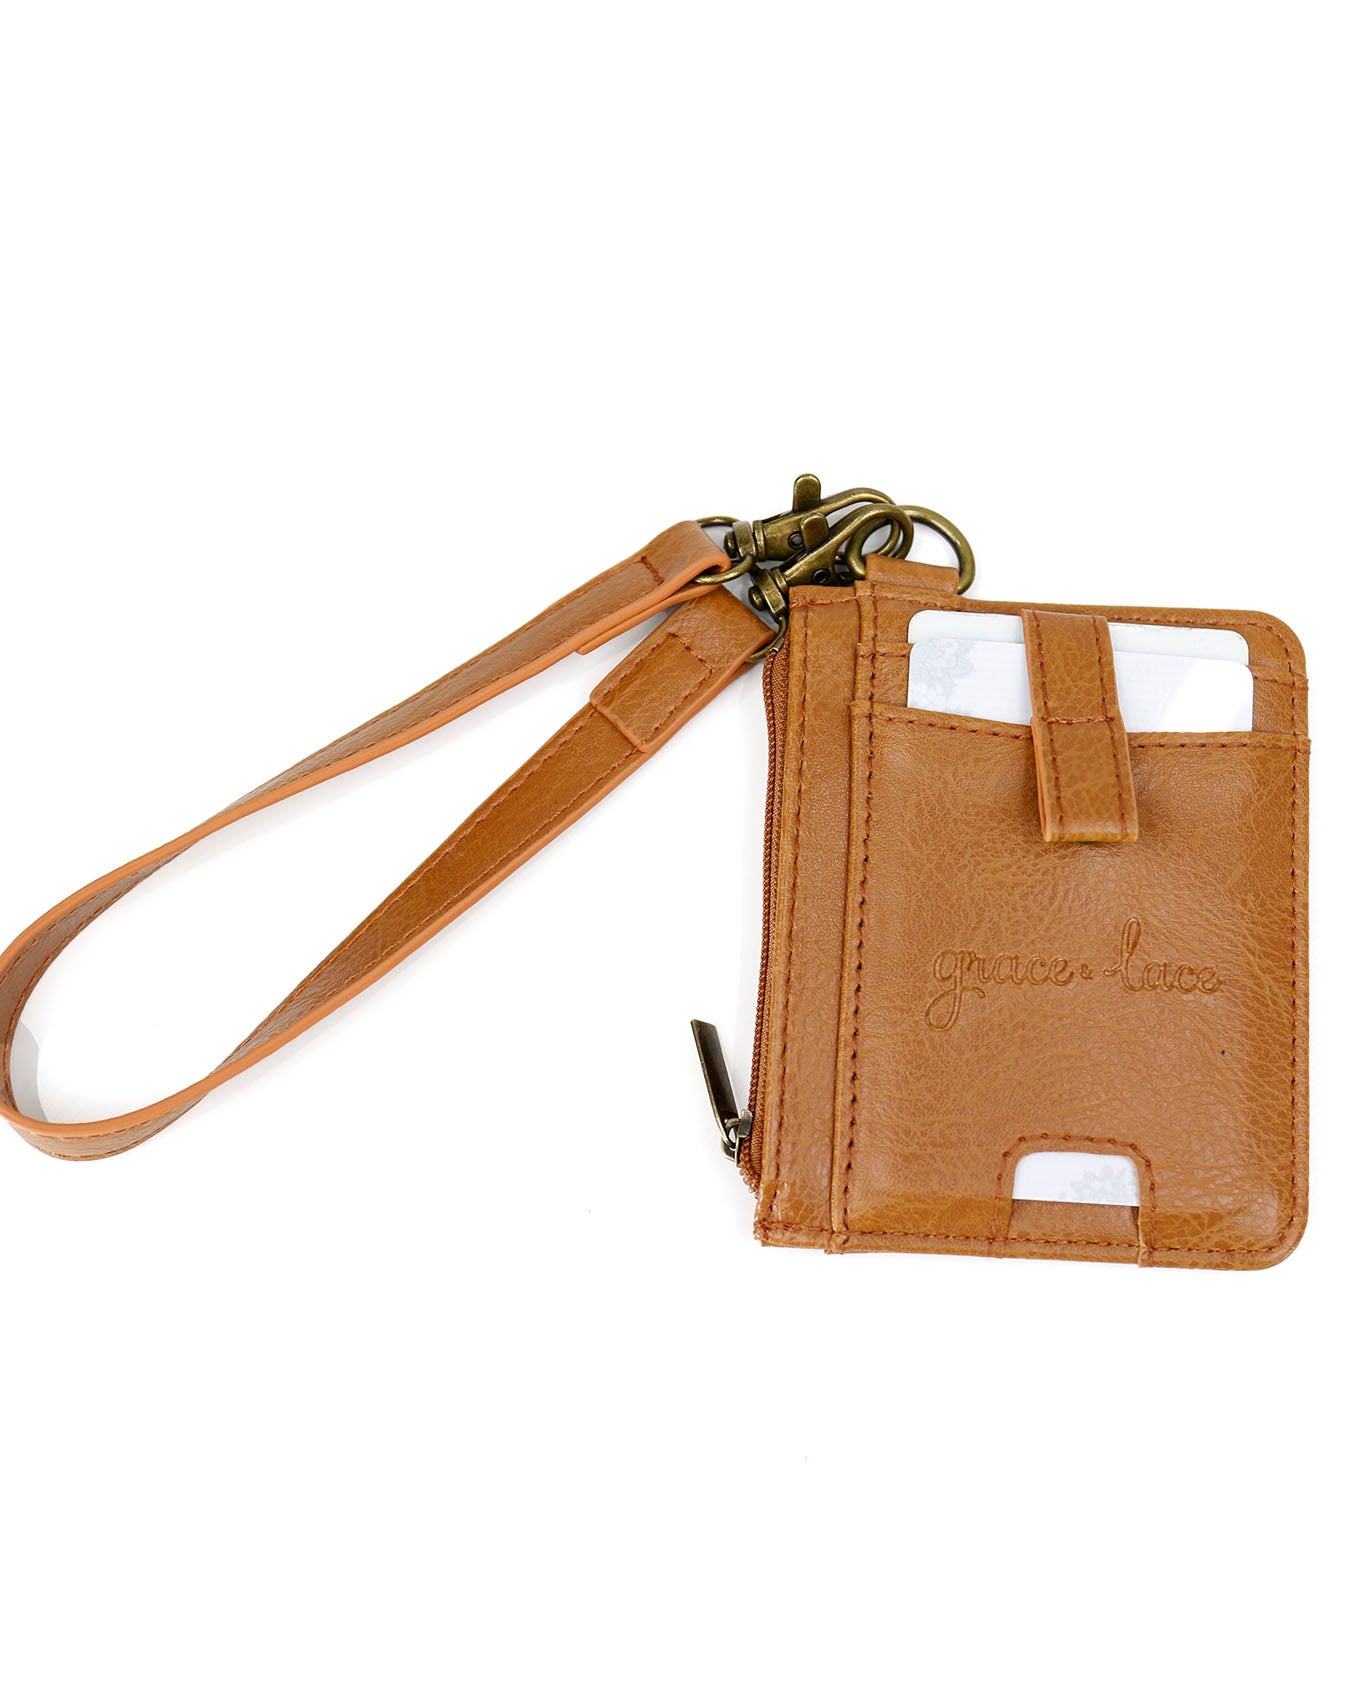 Leather ID Card Holder with Lanyard | Personalized Leather Badge Holder with Lanyard Dark Brown / Short